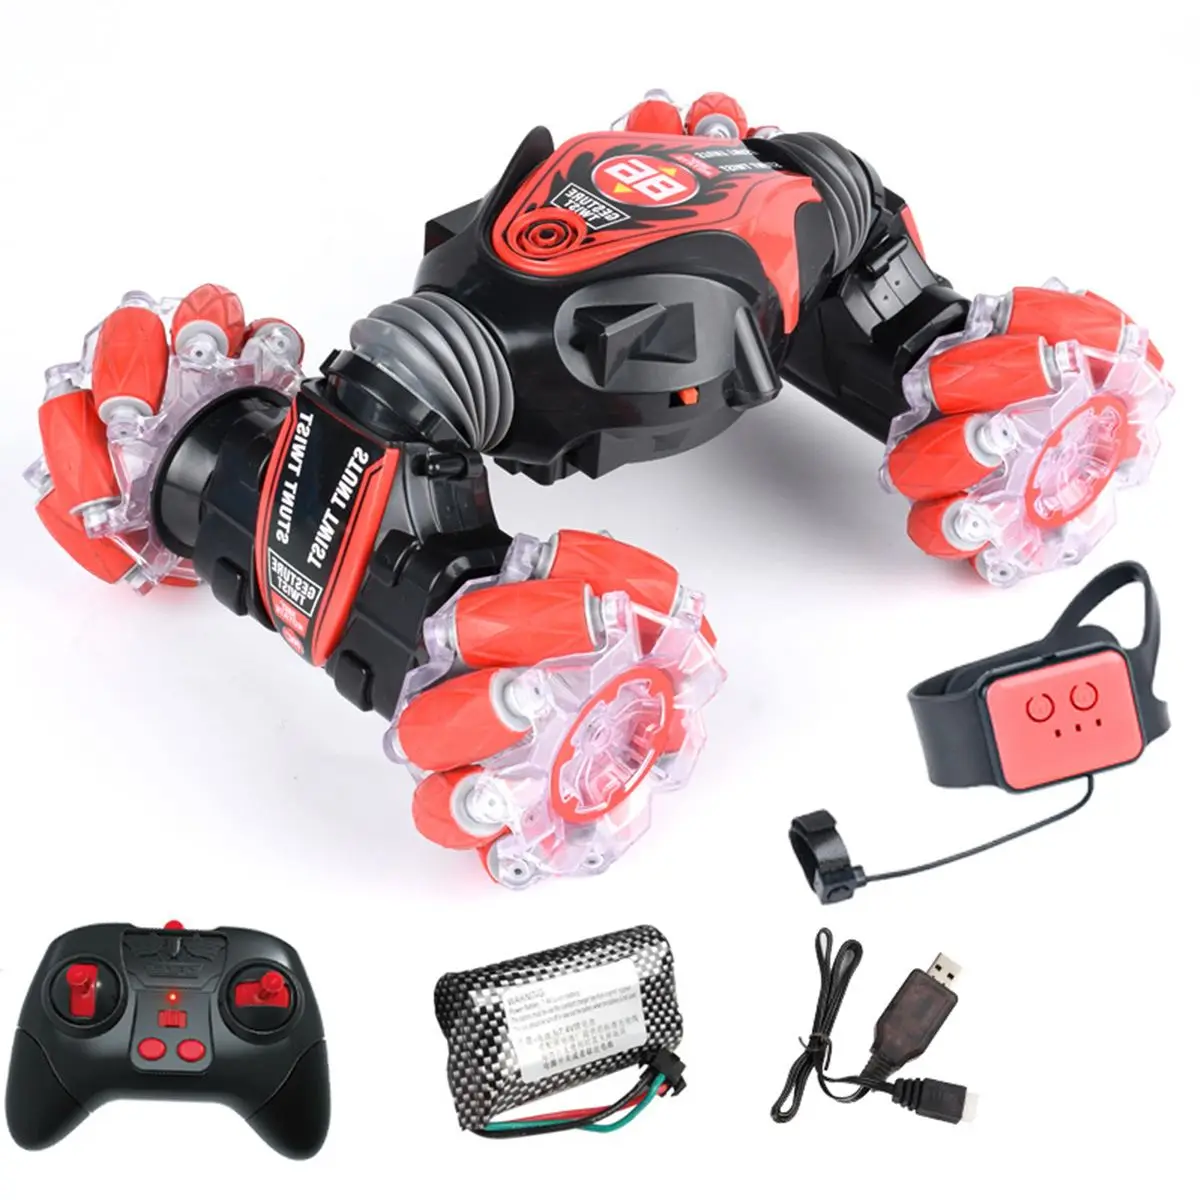 

4WD 2.4GHz Remote Control Stunt Car Gesture Induction Twisting Off-Road Cars Vehicle with Light & Music Drift RC Toys for Kids